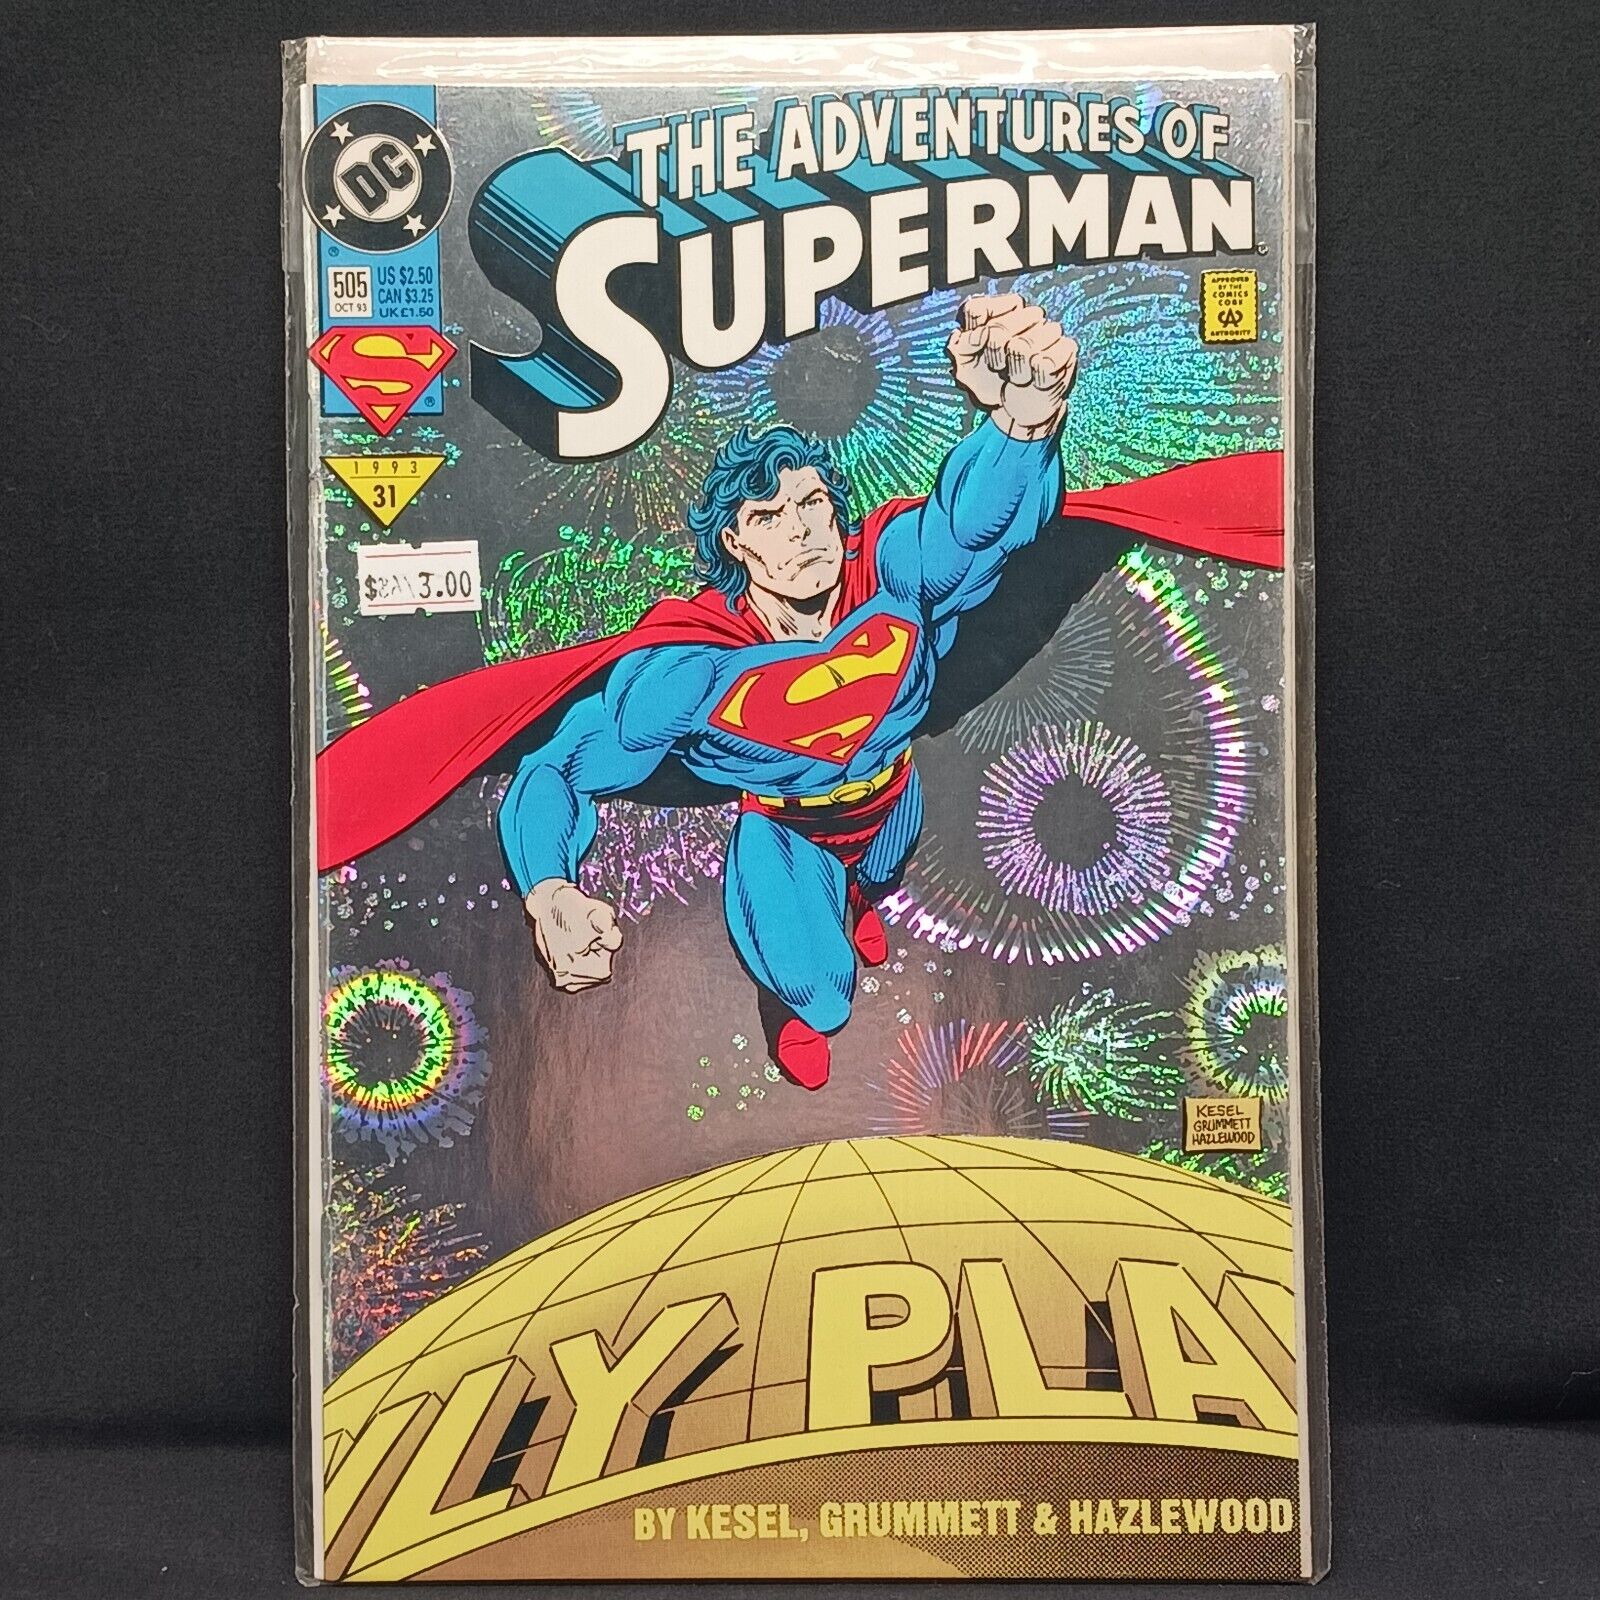 THE ADVENTURES OF SUPERMAN #505 COMIC BOOK (OCTOBER 93, DC)